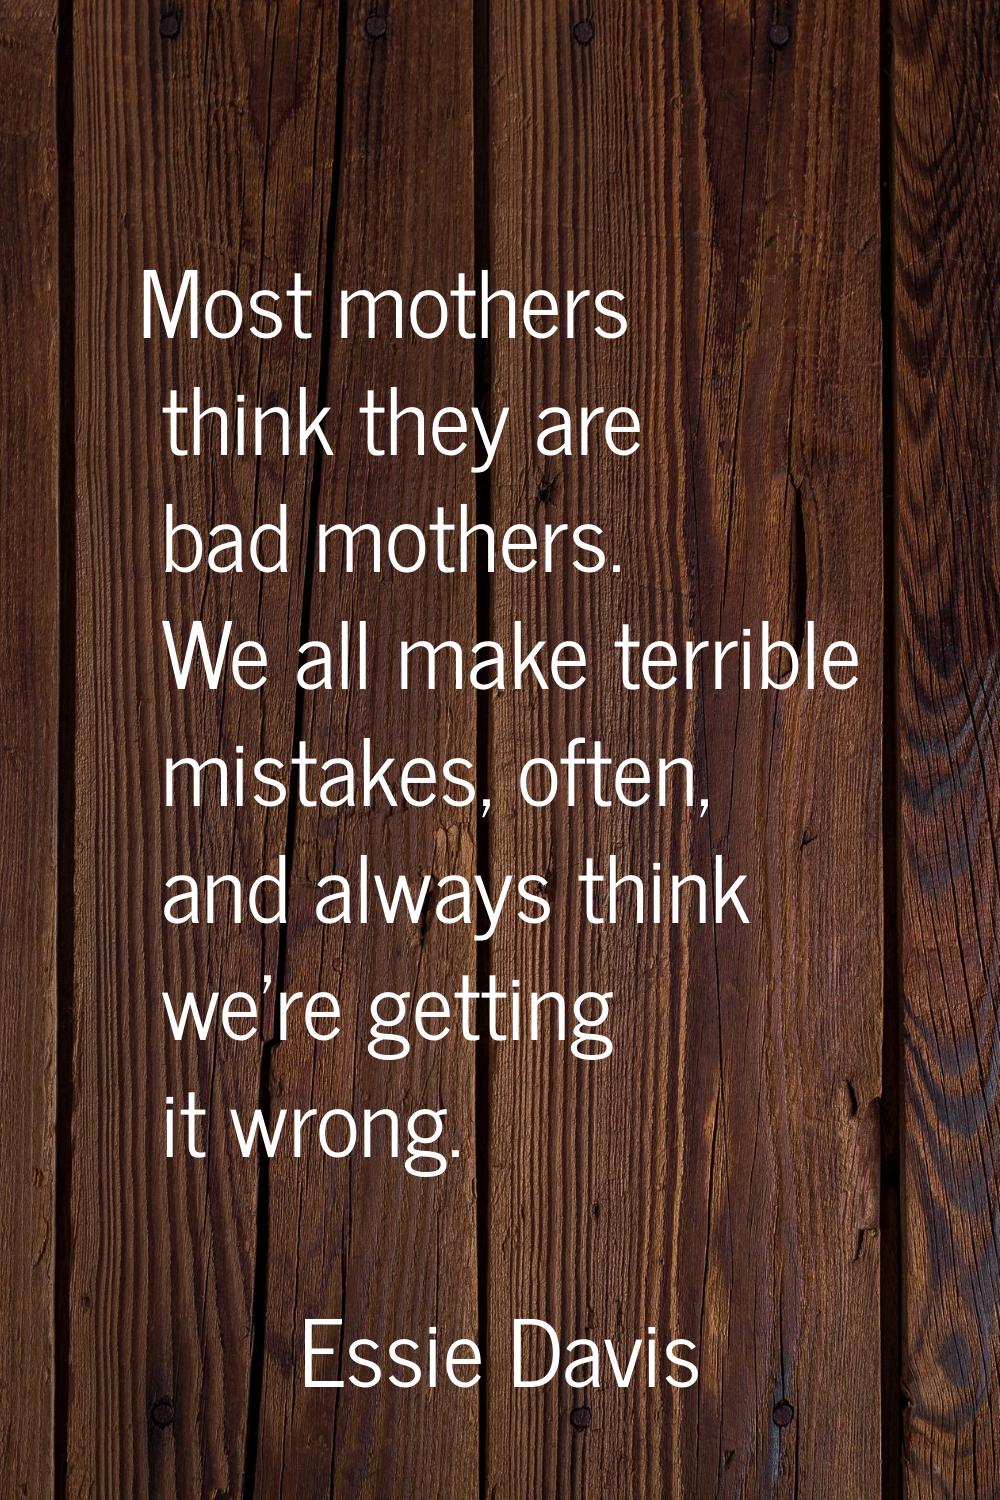 Most mothers think they are bad mothers. We all make terrible mistakes, often, and always think we'